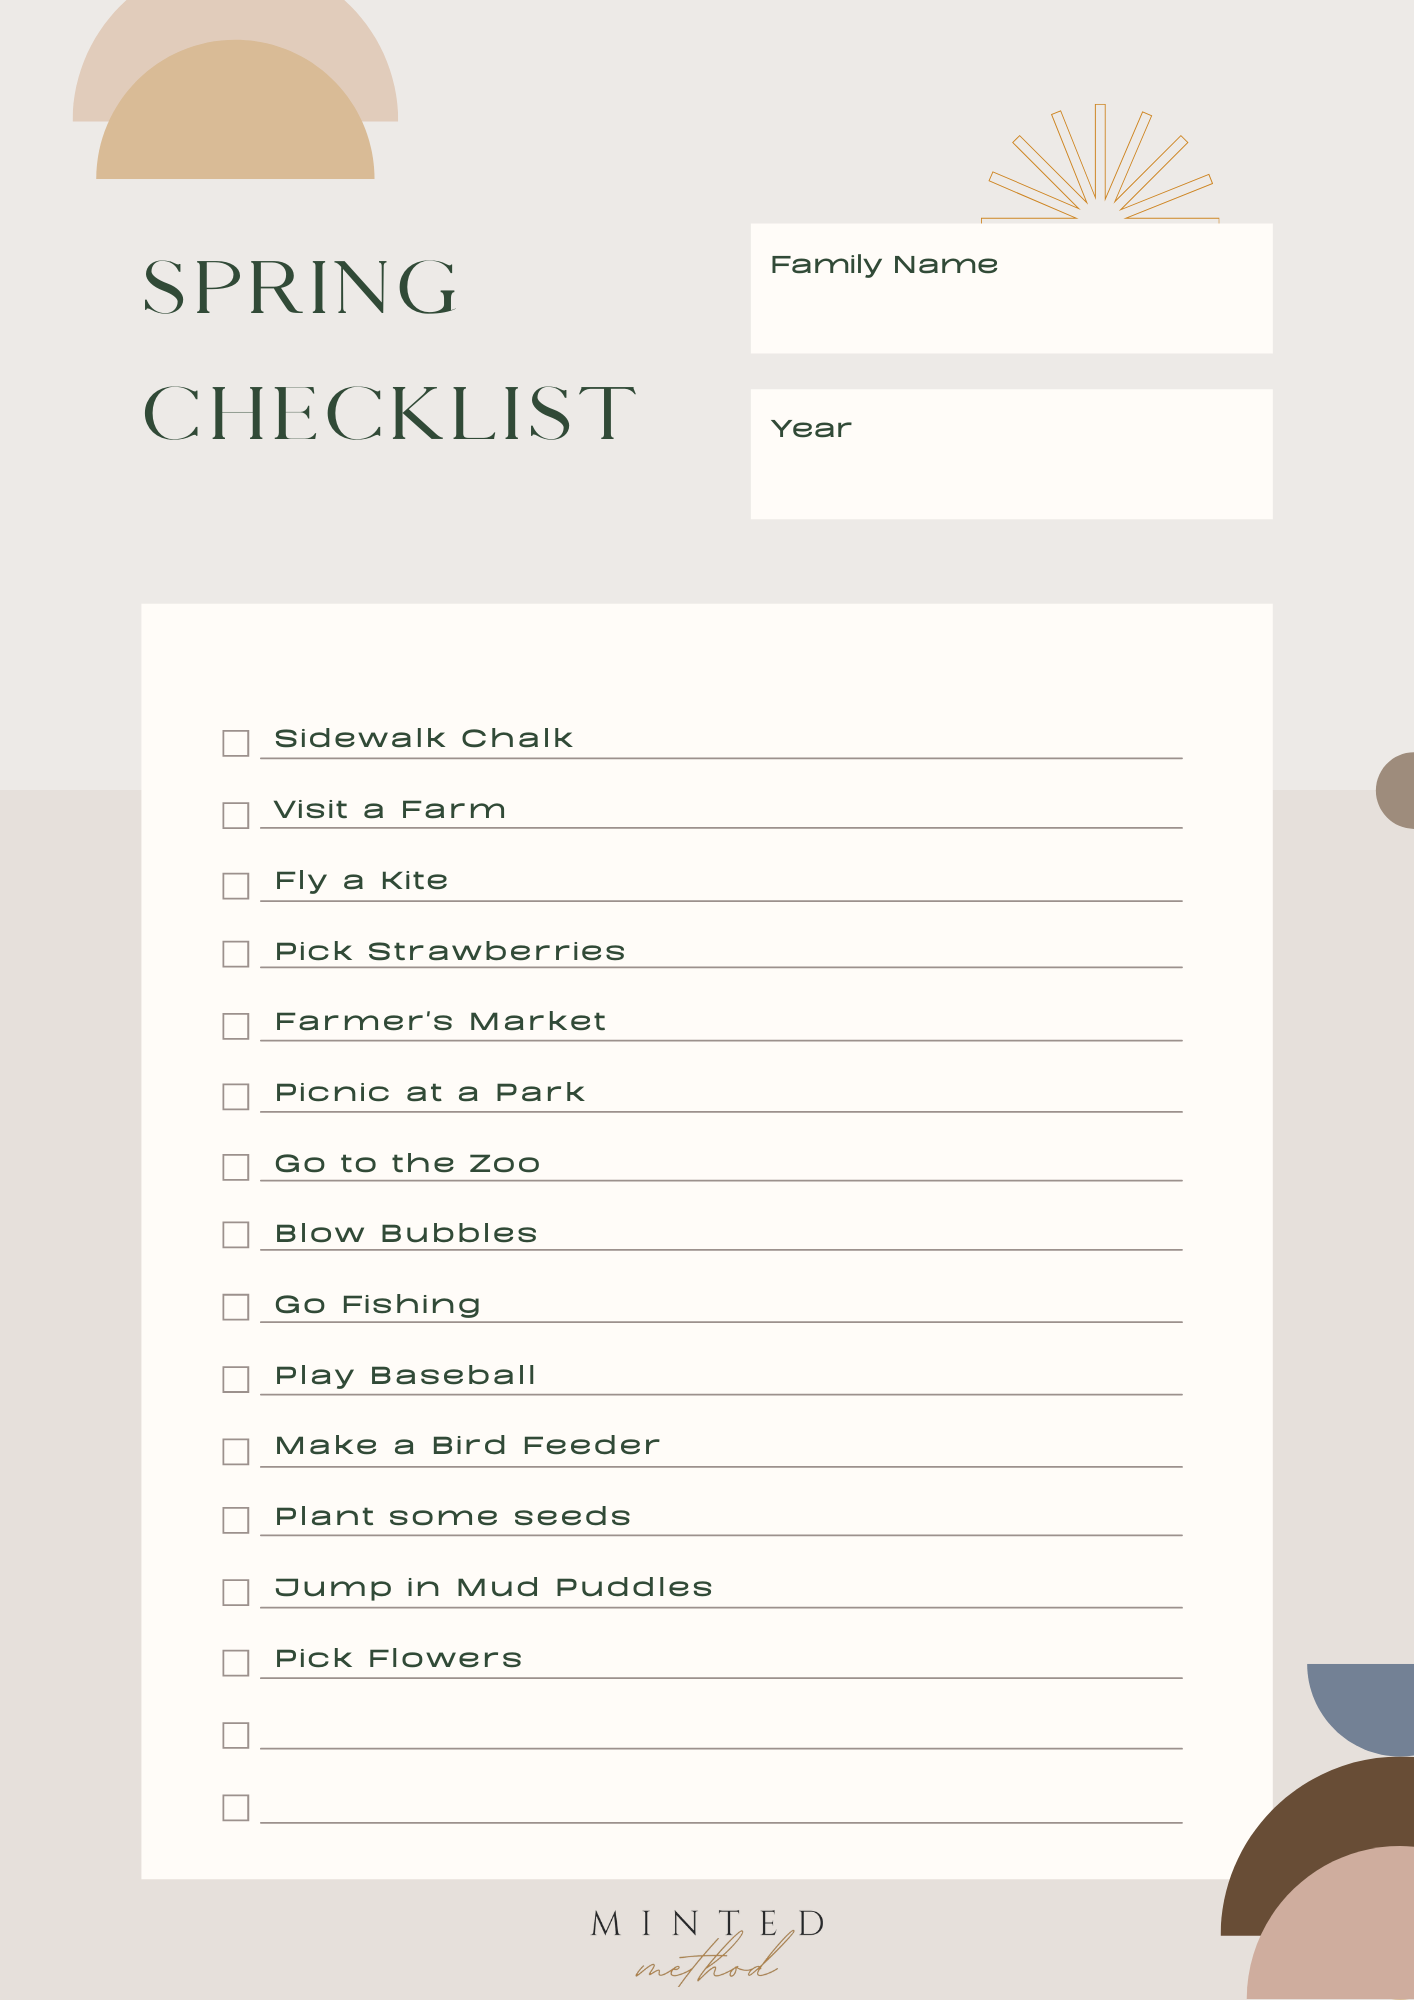 Printable Spring Family Checklist to Get You Out of the House!